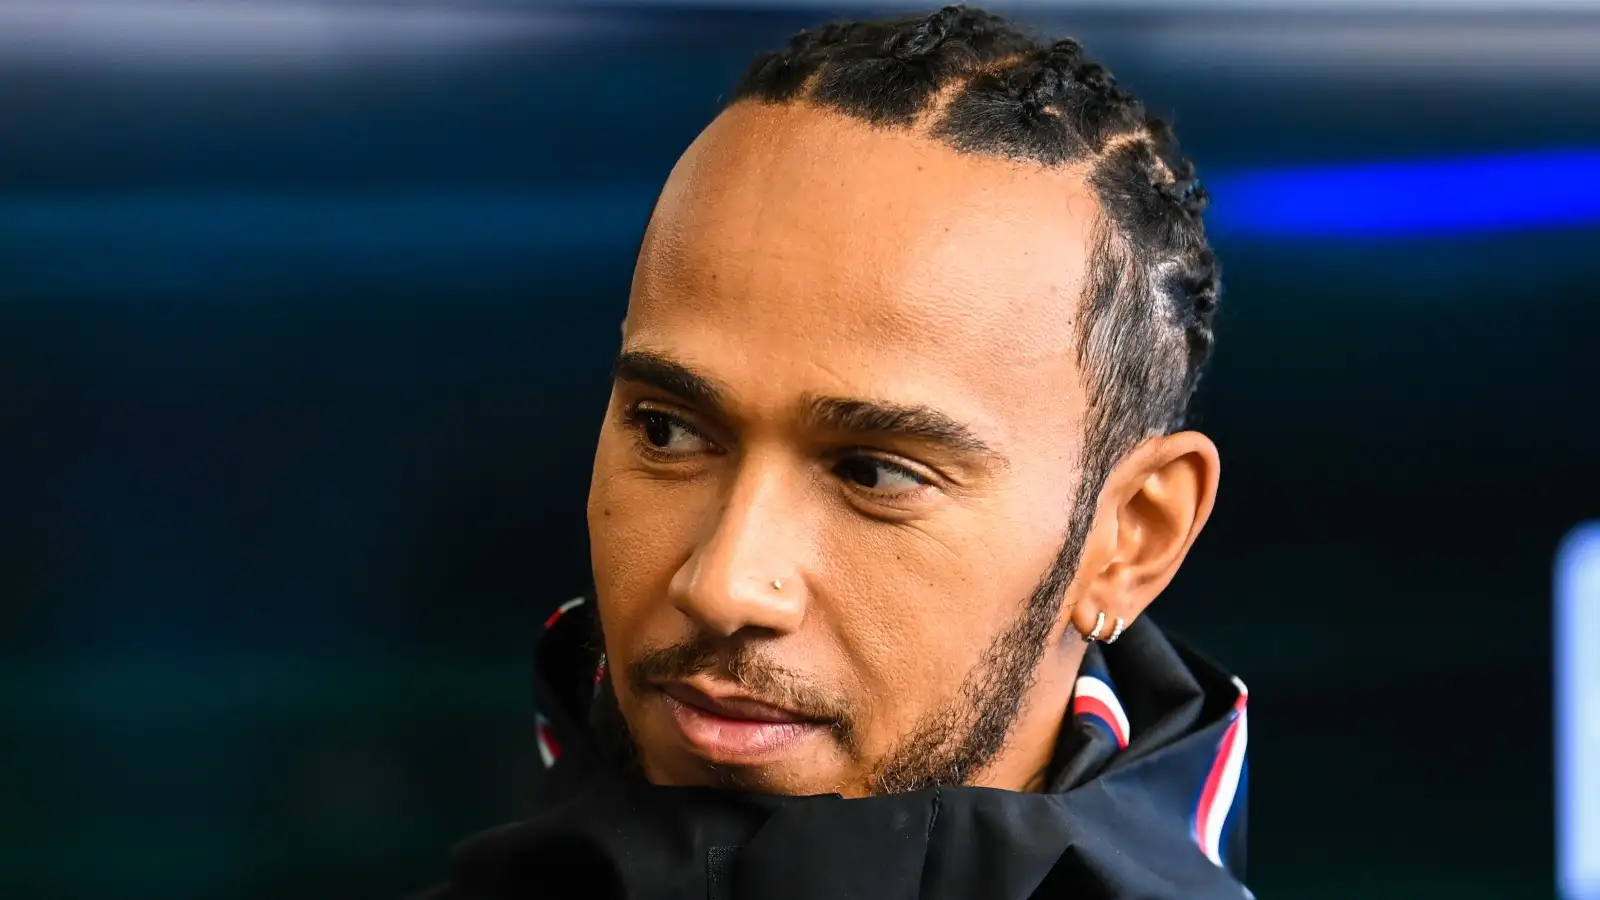 Lewis Hamilton with a coat on. Silverstone, February 2023.